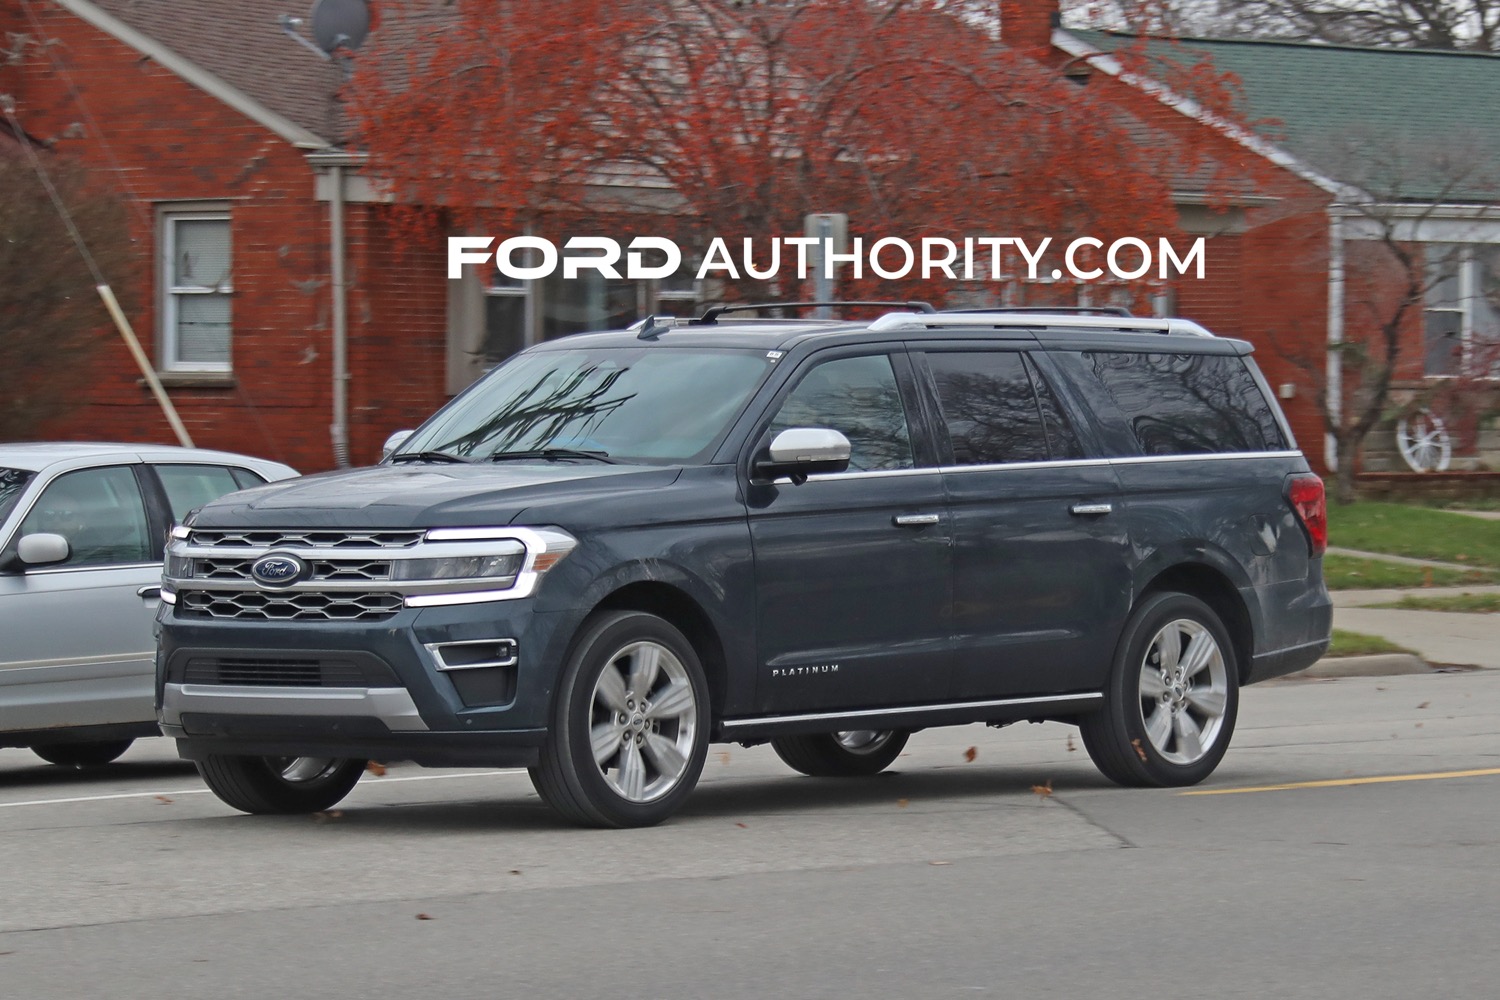 2022 Ford Expedition Platinum Max: Real World Photo Gallery